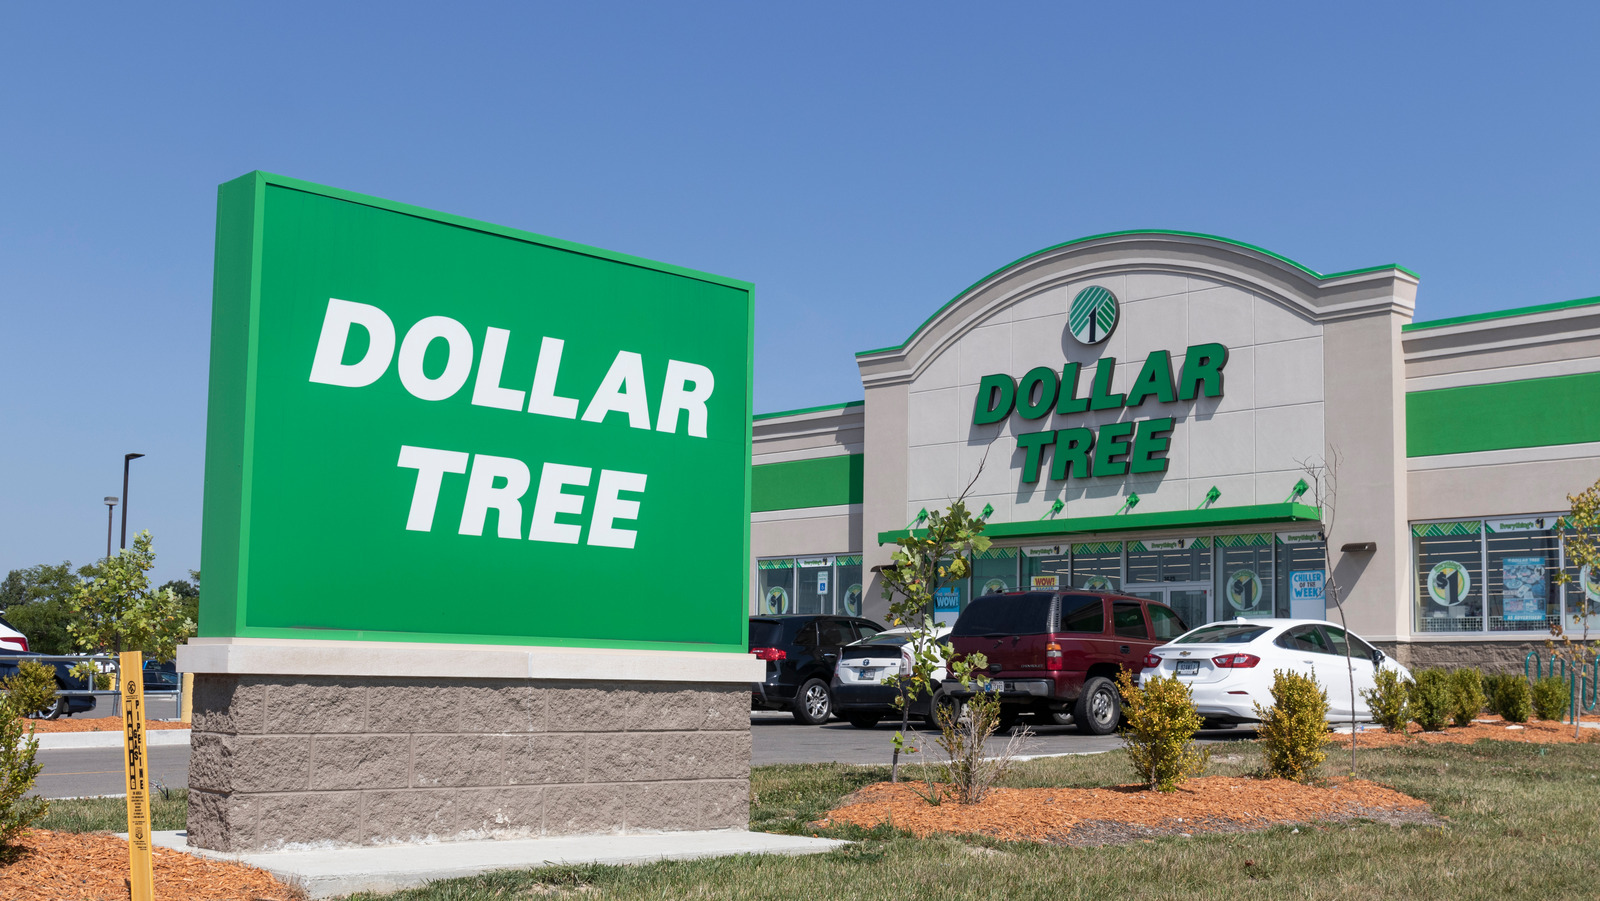 My Experience Eating Only Food From the Dollar Store for a Week